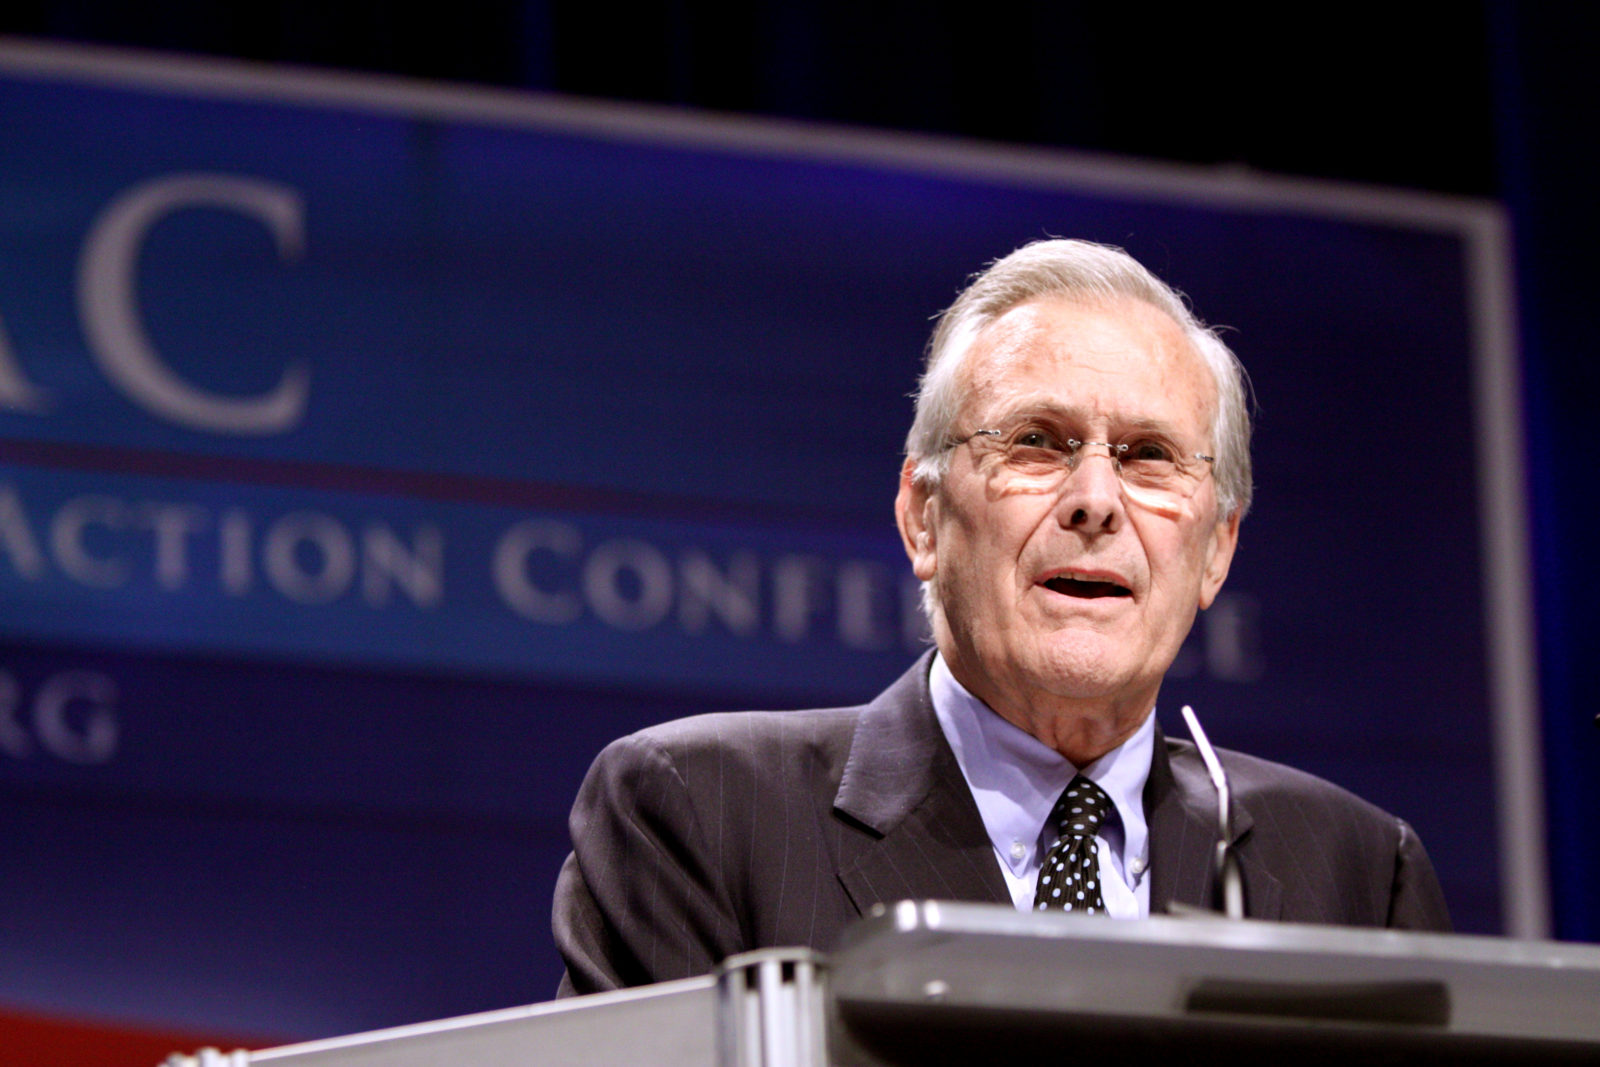 Former United States Secretary of Defense Donald Rumsfeld speaking at CPAC 2011 in Washington, D.C, and receiving the Defender of the Constitution Award.